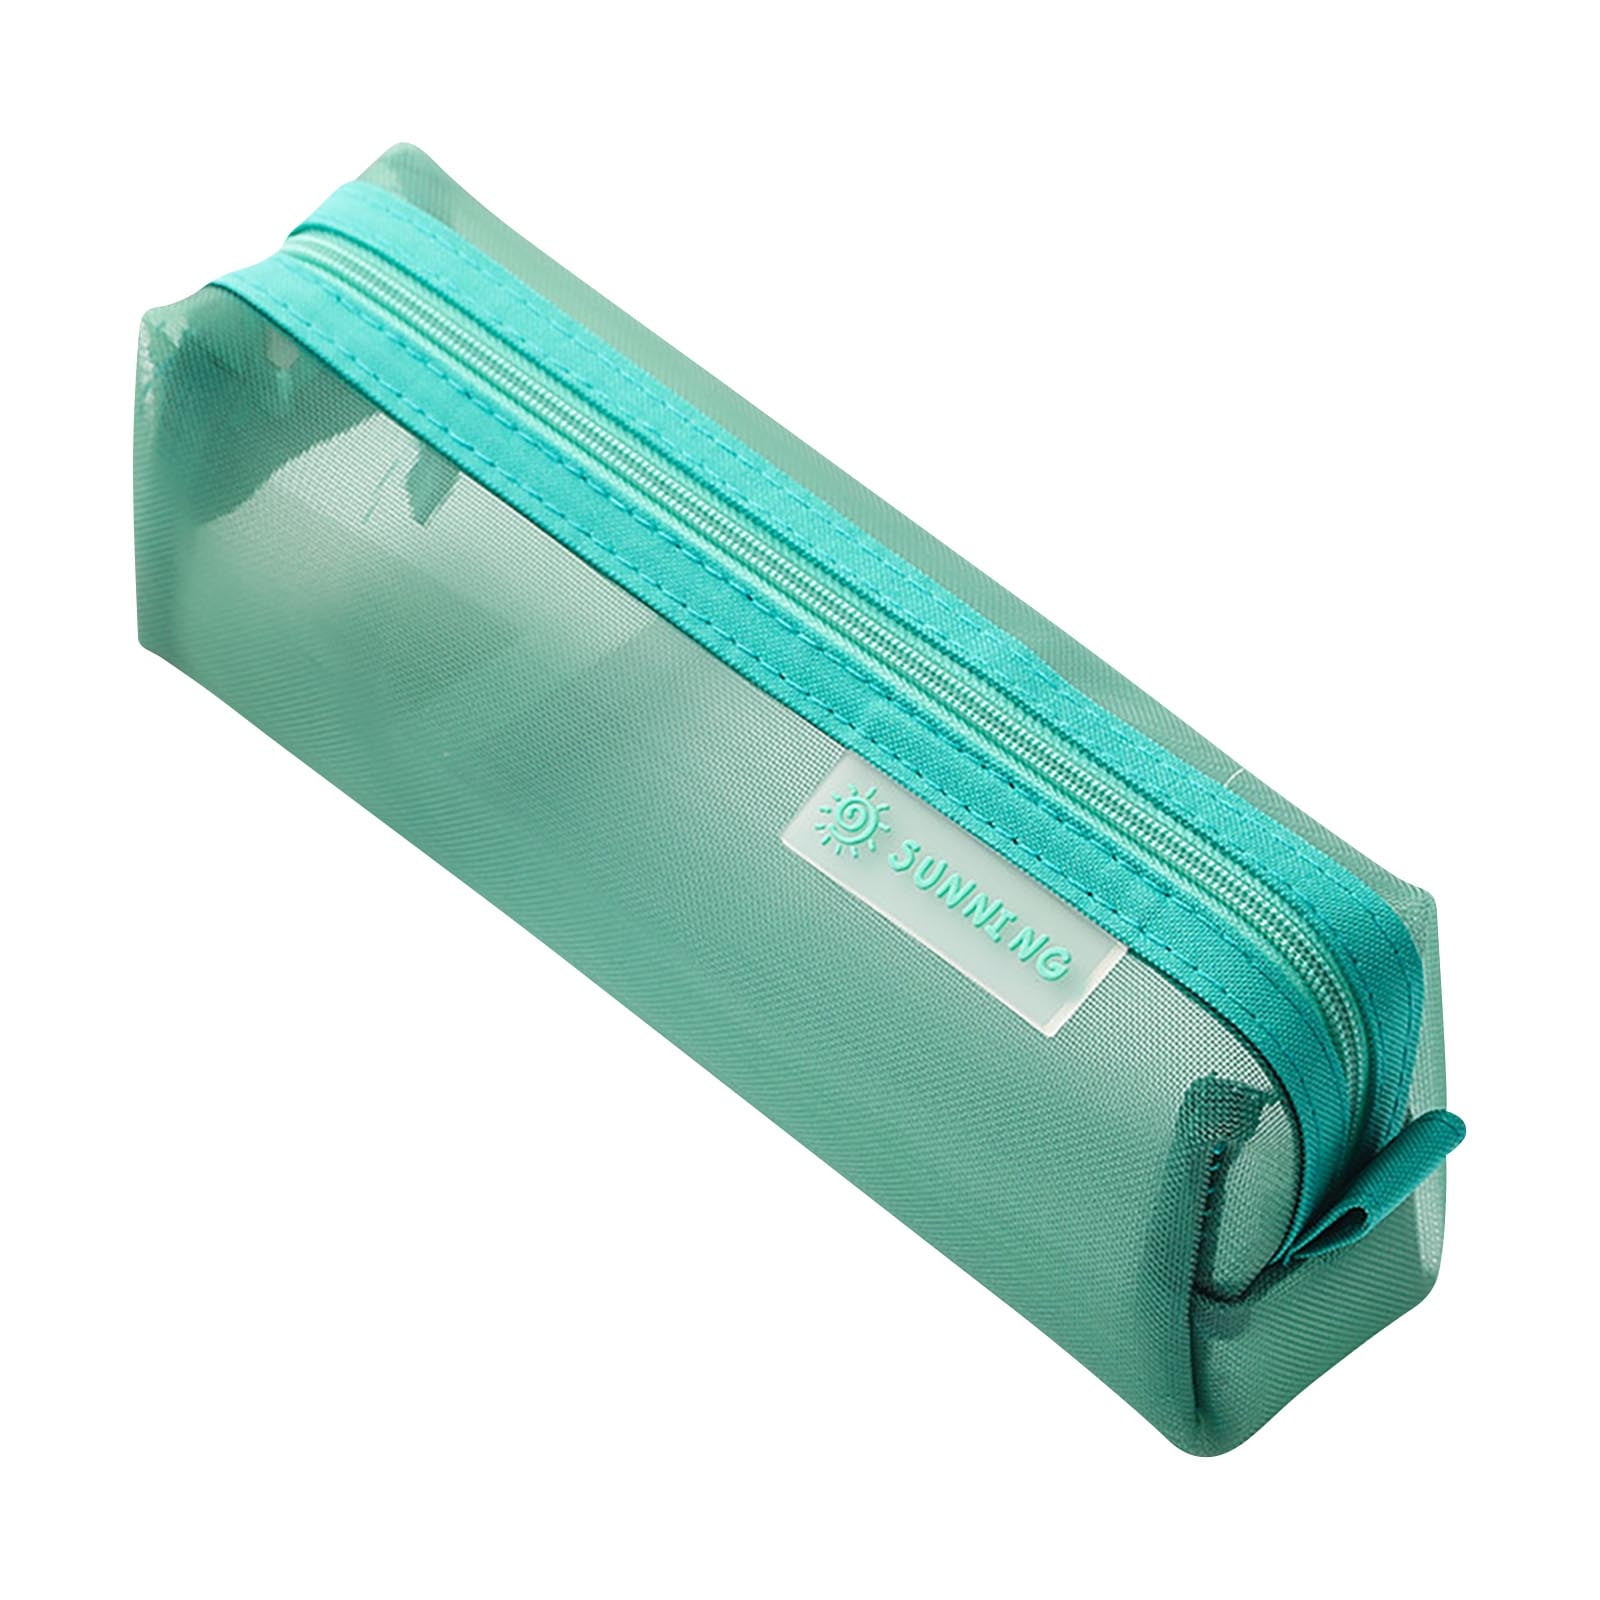  Beach Coastal Sea Shell Waves Teal Pencil Case Pen Bags Zipper  Pouch Storage Organizer Box Stationery Large Capacity Double Compartment  Makeup Bag for School Office College Student : Arts, Crafts 